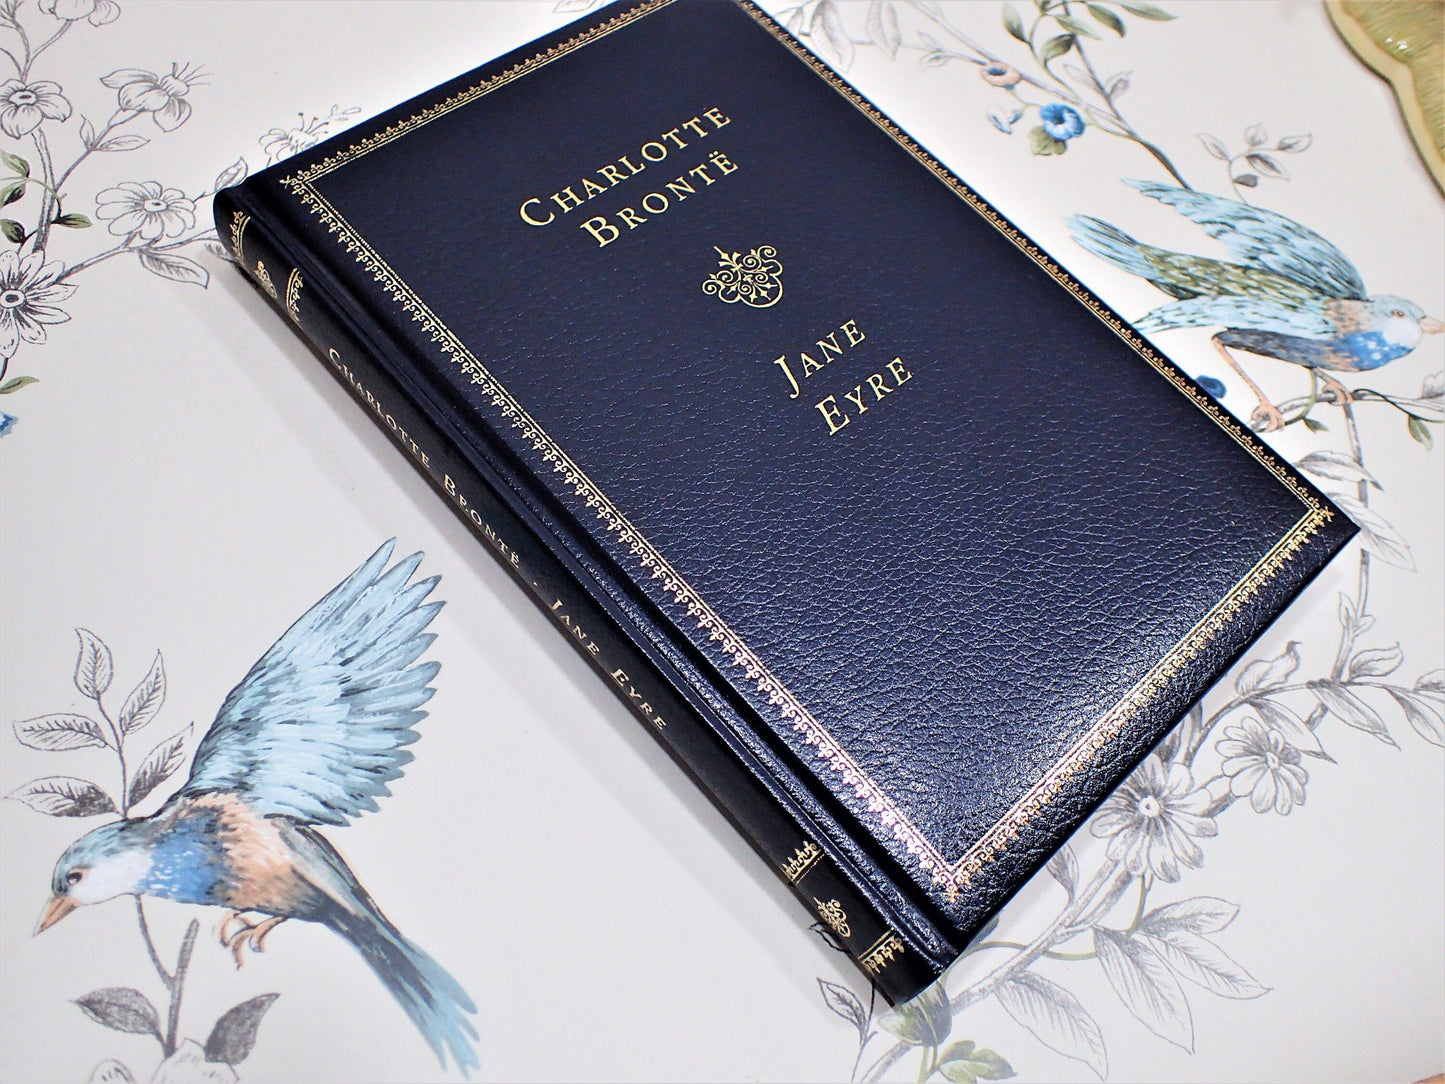 Spine and Front cover of Charlotte Bronte Book in Midnight Blue Faux Leather with Gilt Titles, Marbled endpapers and Gilt Edged Pages